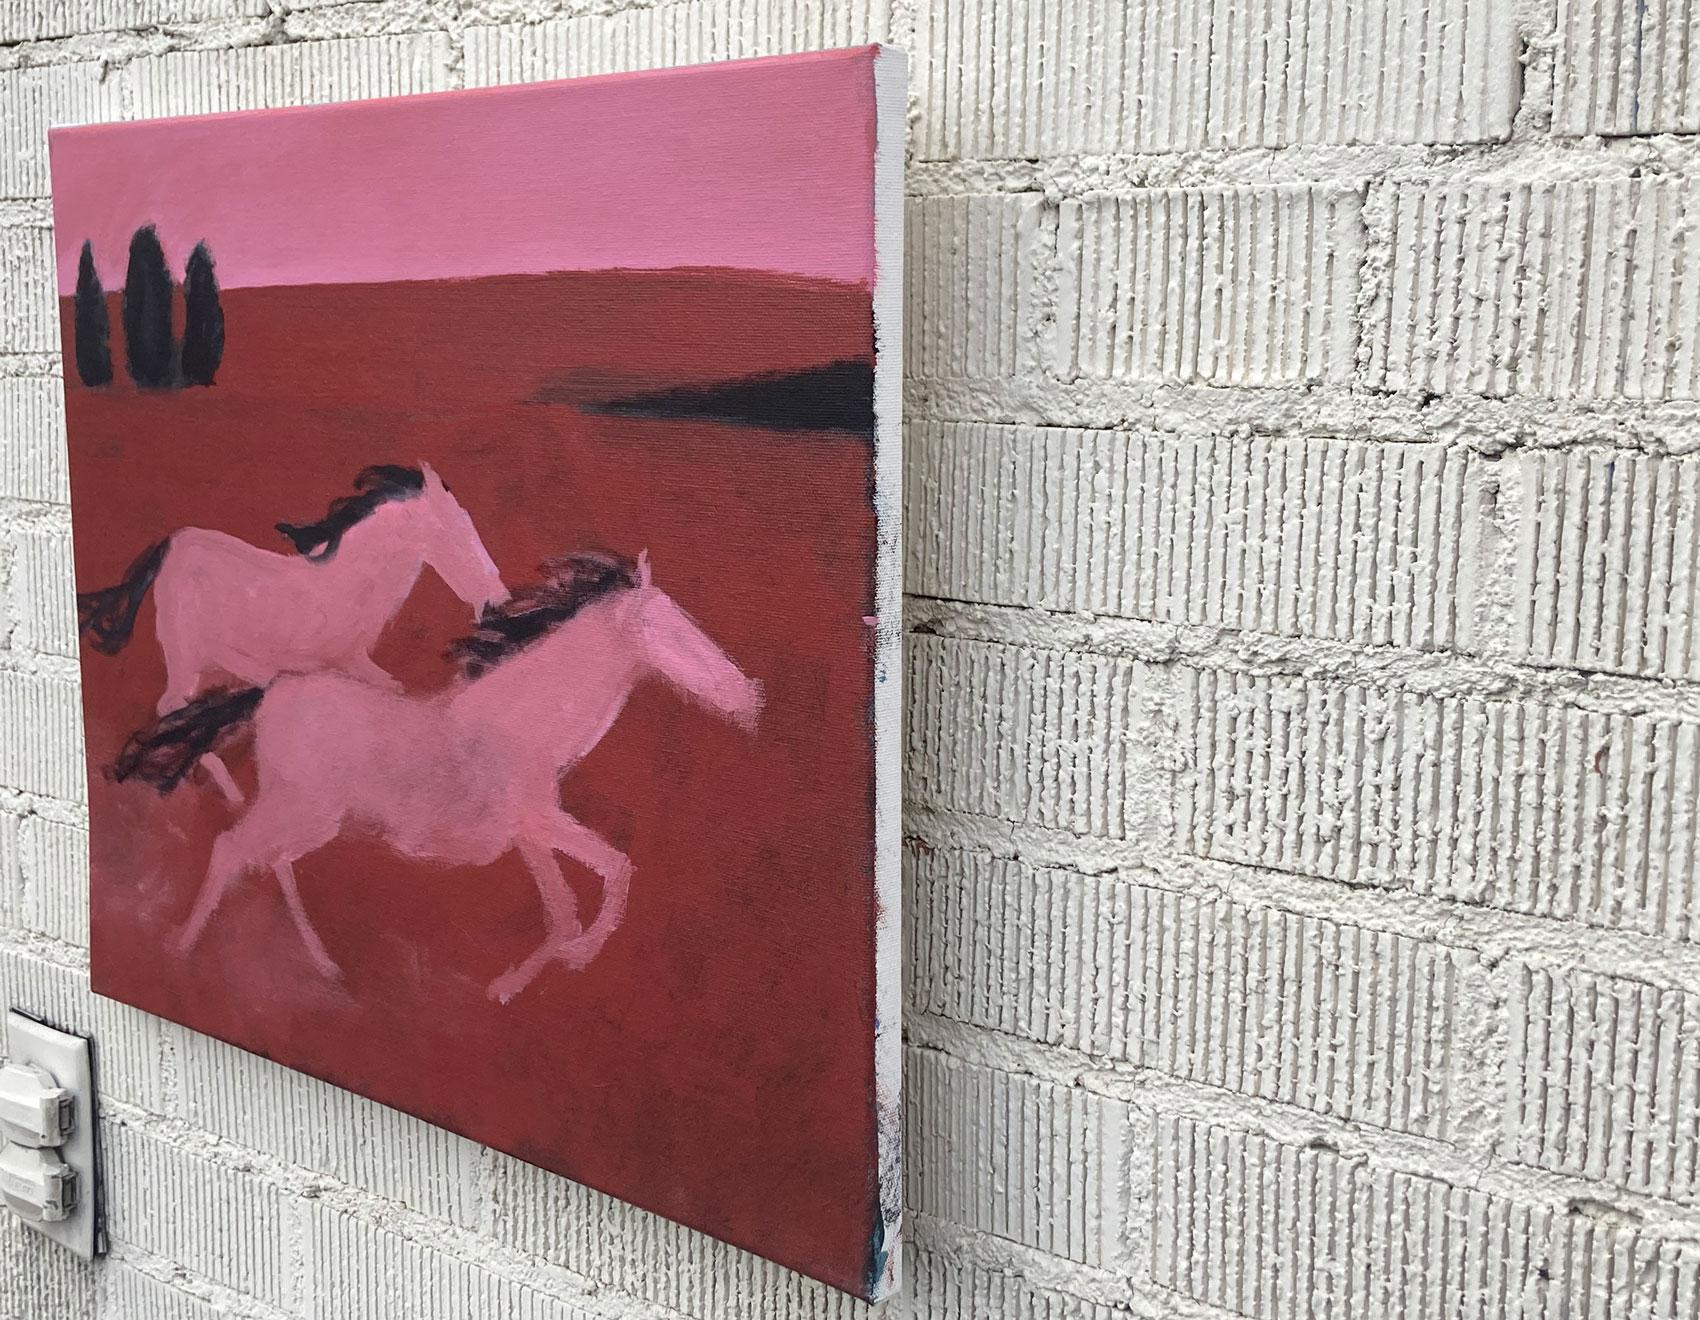 <p>Artist Comments<br>Two pink horses run through a broad expanse in artist Nick Bontorno's piece. The vibrant red hues of the galloping equines radiate an intense vitality and spirit. Nick paints in a primitive style, creating an atmosphere of